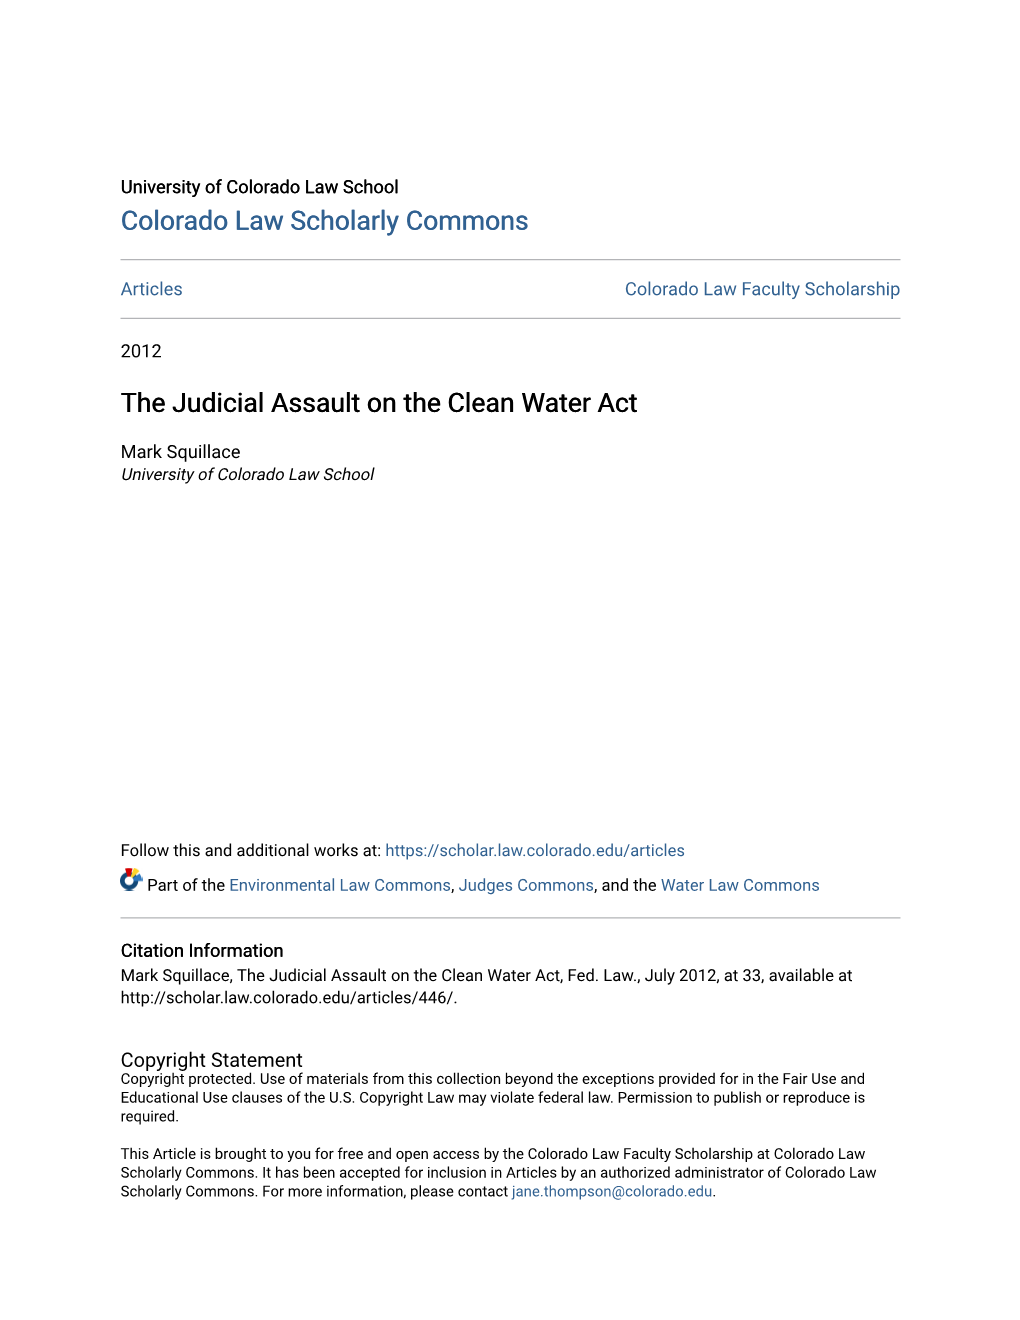 The Judicial Assault on the Clean Water Act